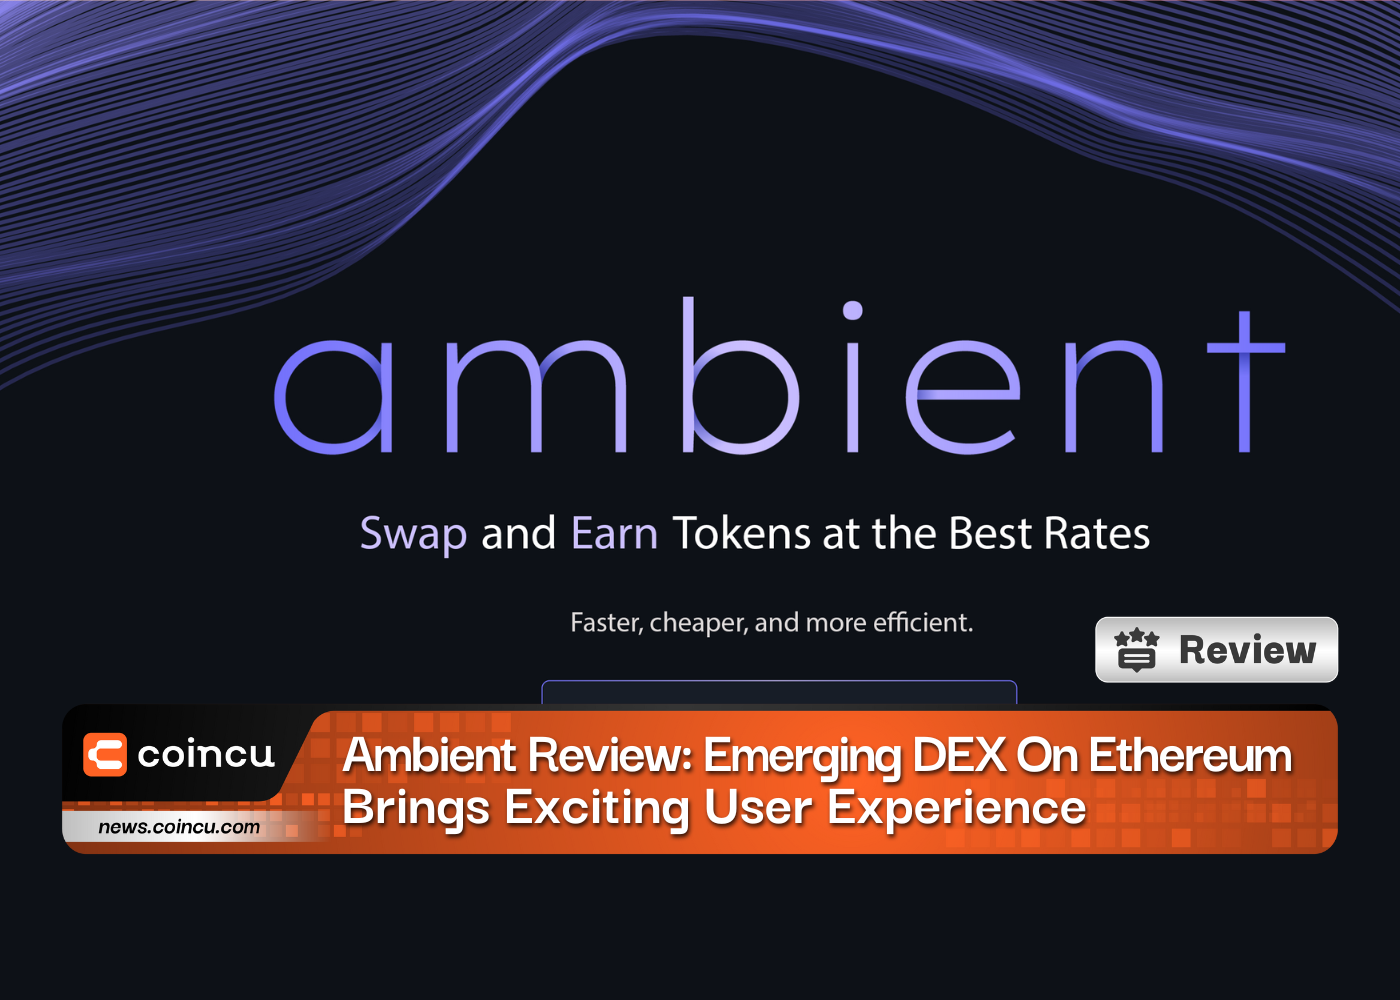 Ambient Review: Emerging DEX On Ethereum Brings Exciting User Experience